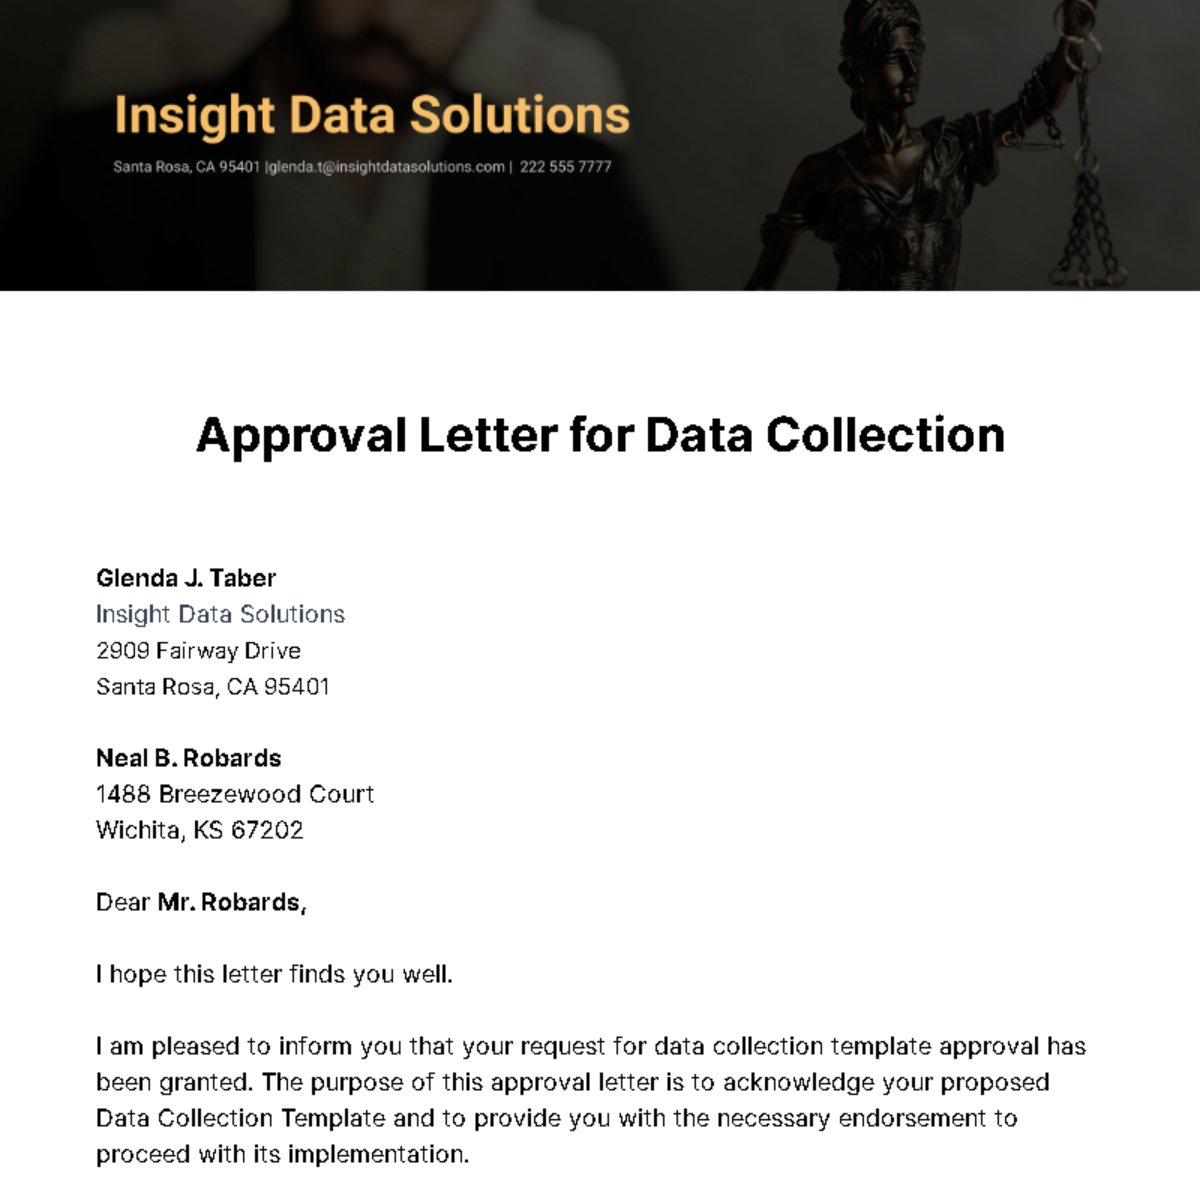 Approval Letter for Data Collection  Template